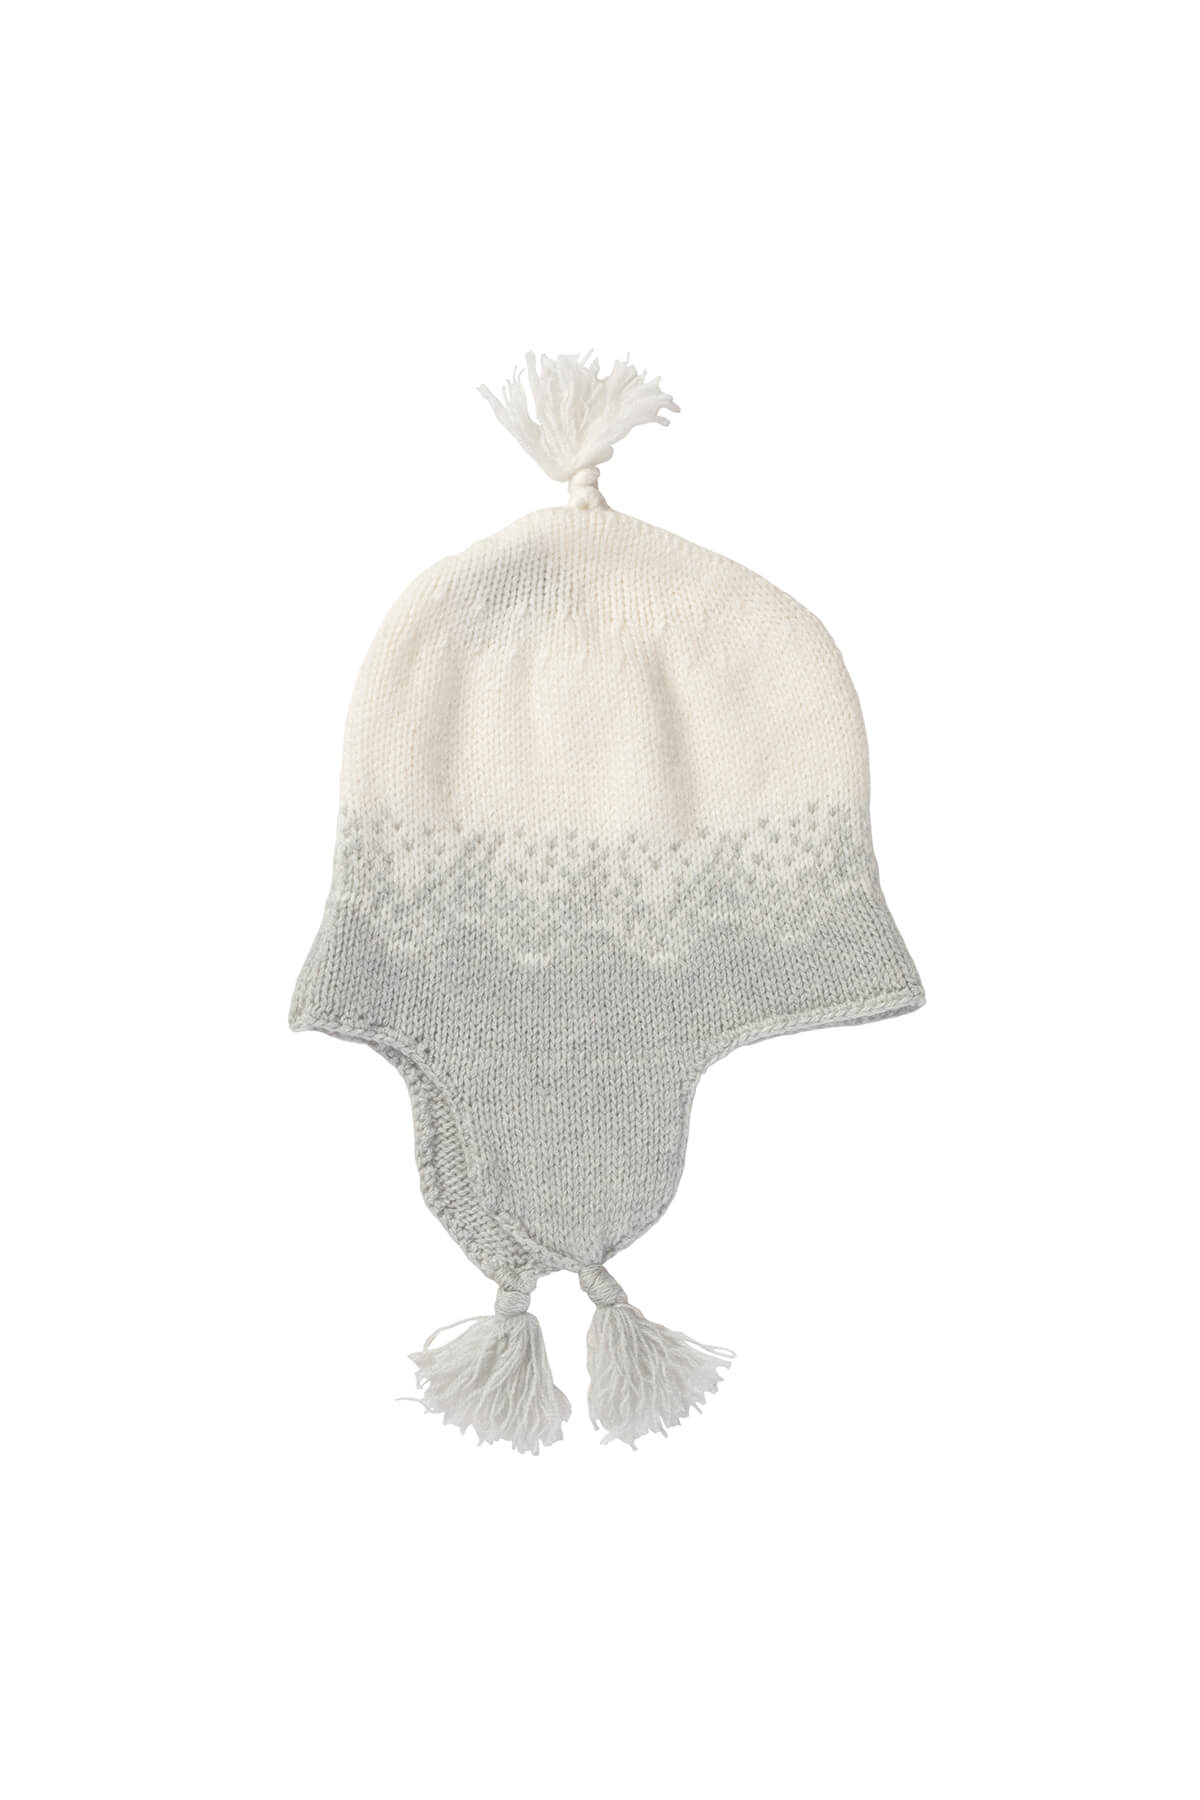 Johnstons of Elgin Gift Set includes our Cashmere Ombre Baby Hat, Mittens & Booties in Pumice on white background AW21GIFTSET22A